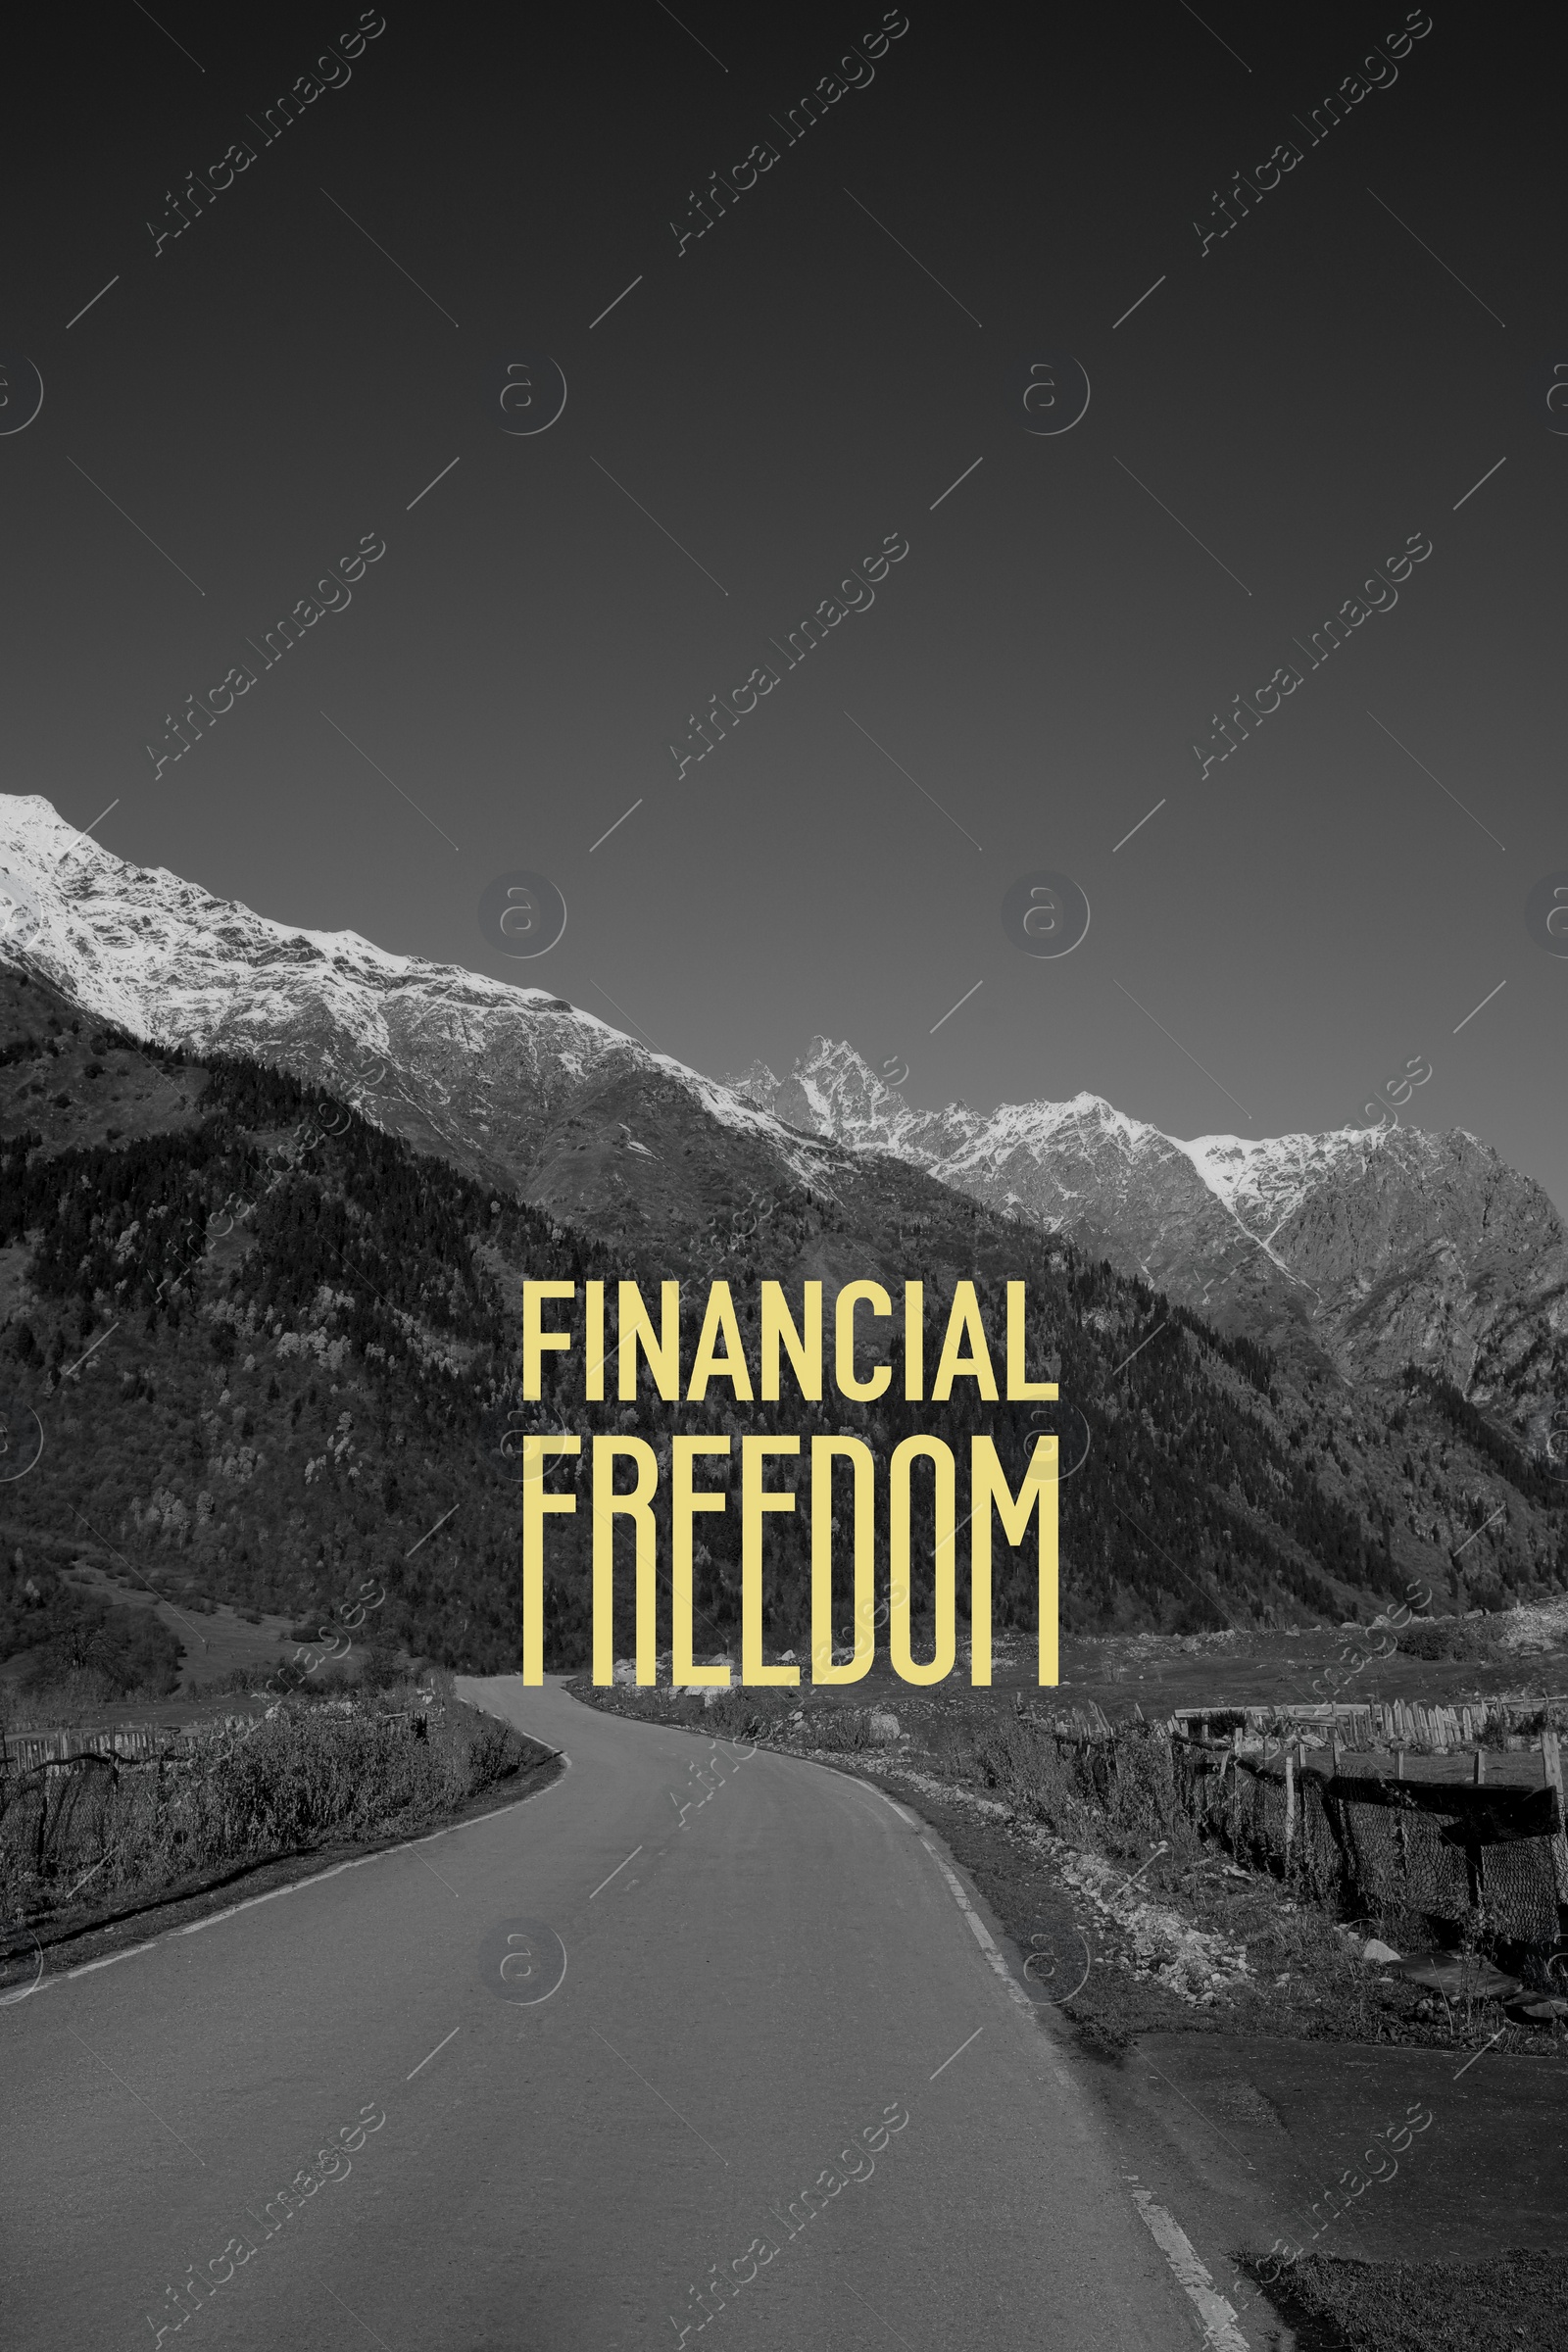 Image of Way to financial freedom. Words over asphalt road, black and white effect